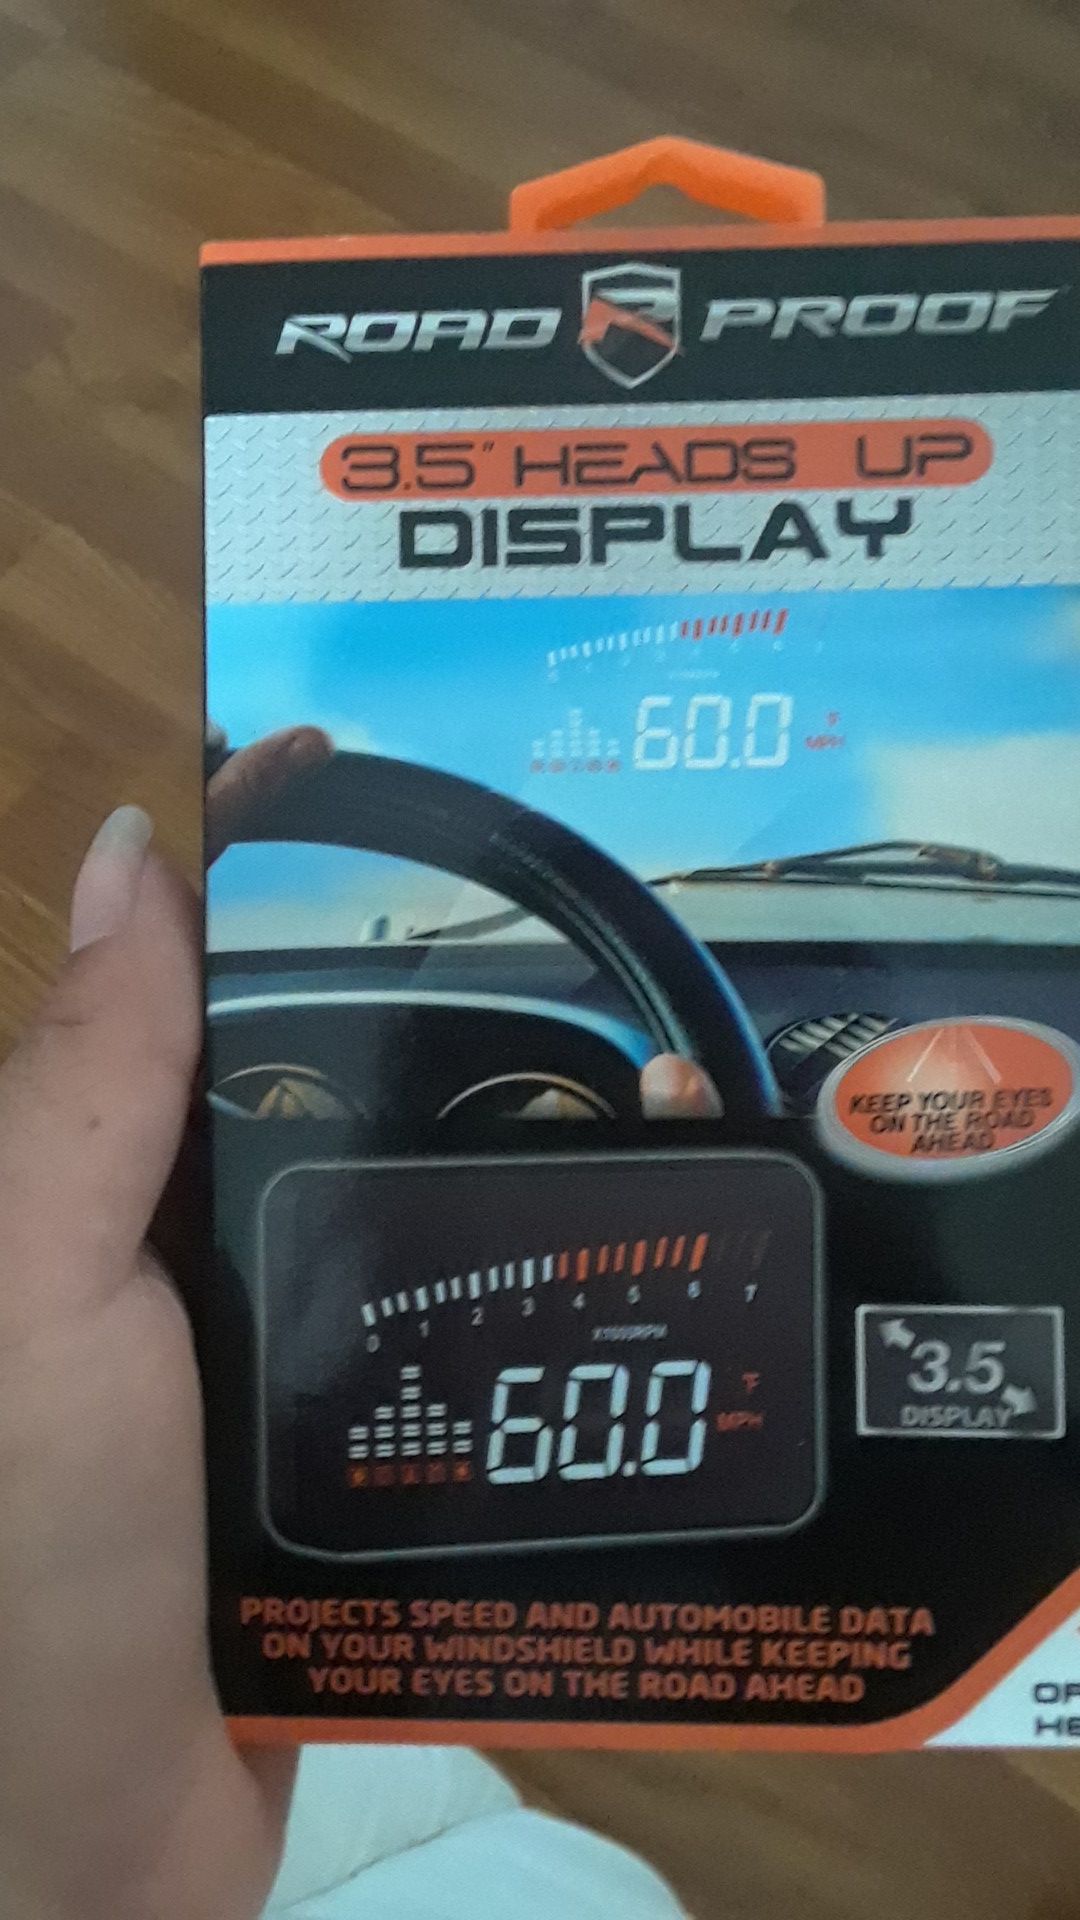 Road proof 3.5" heads up display